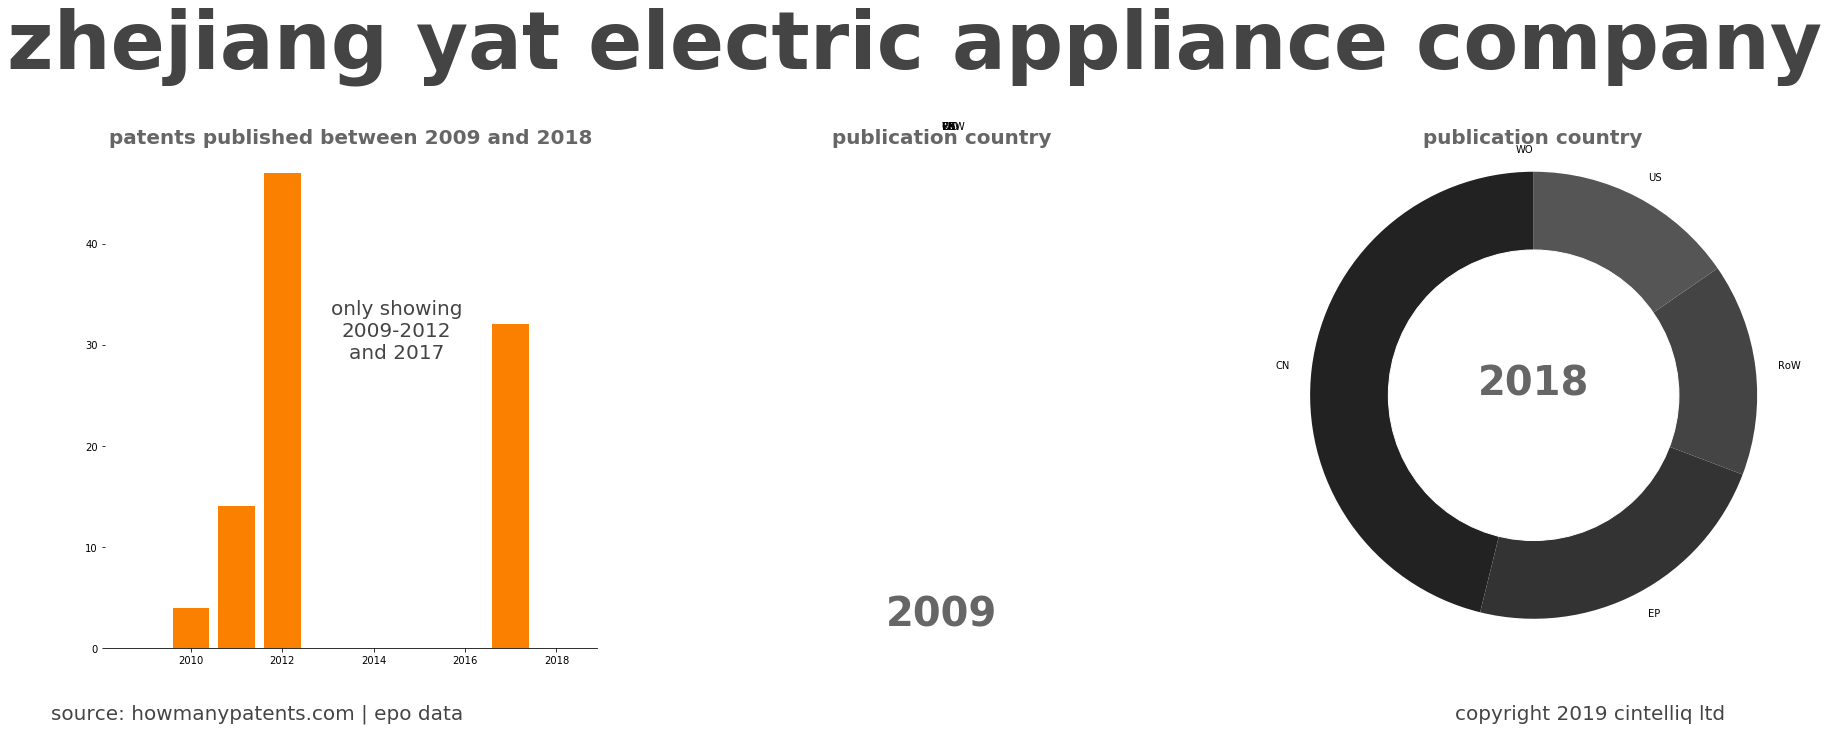 summary of patents for Zhejiang Yat Electric Appliance Company